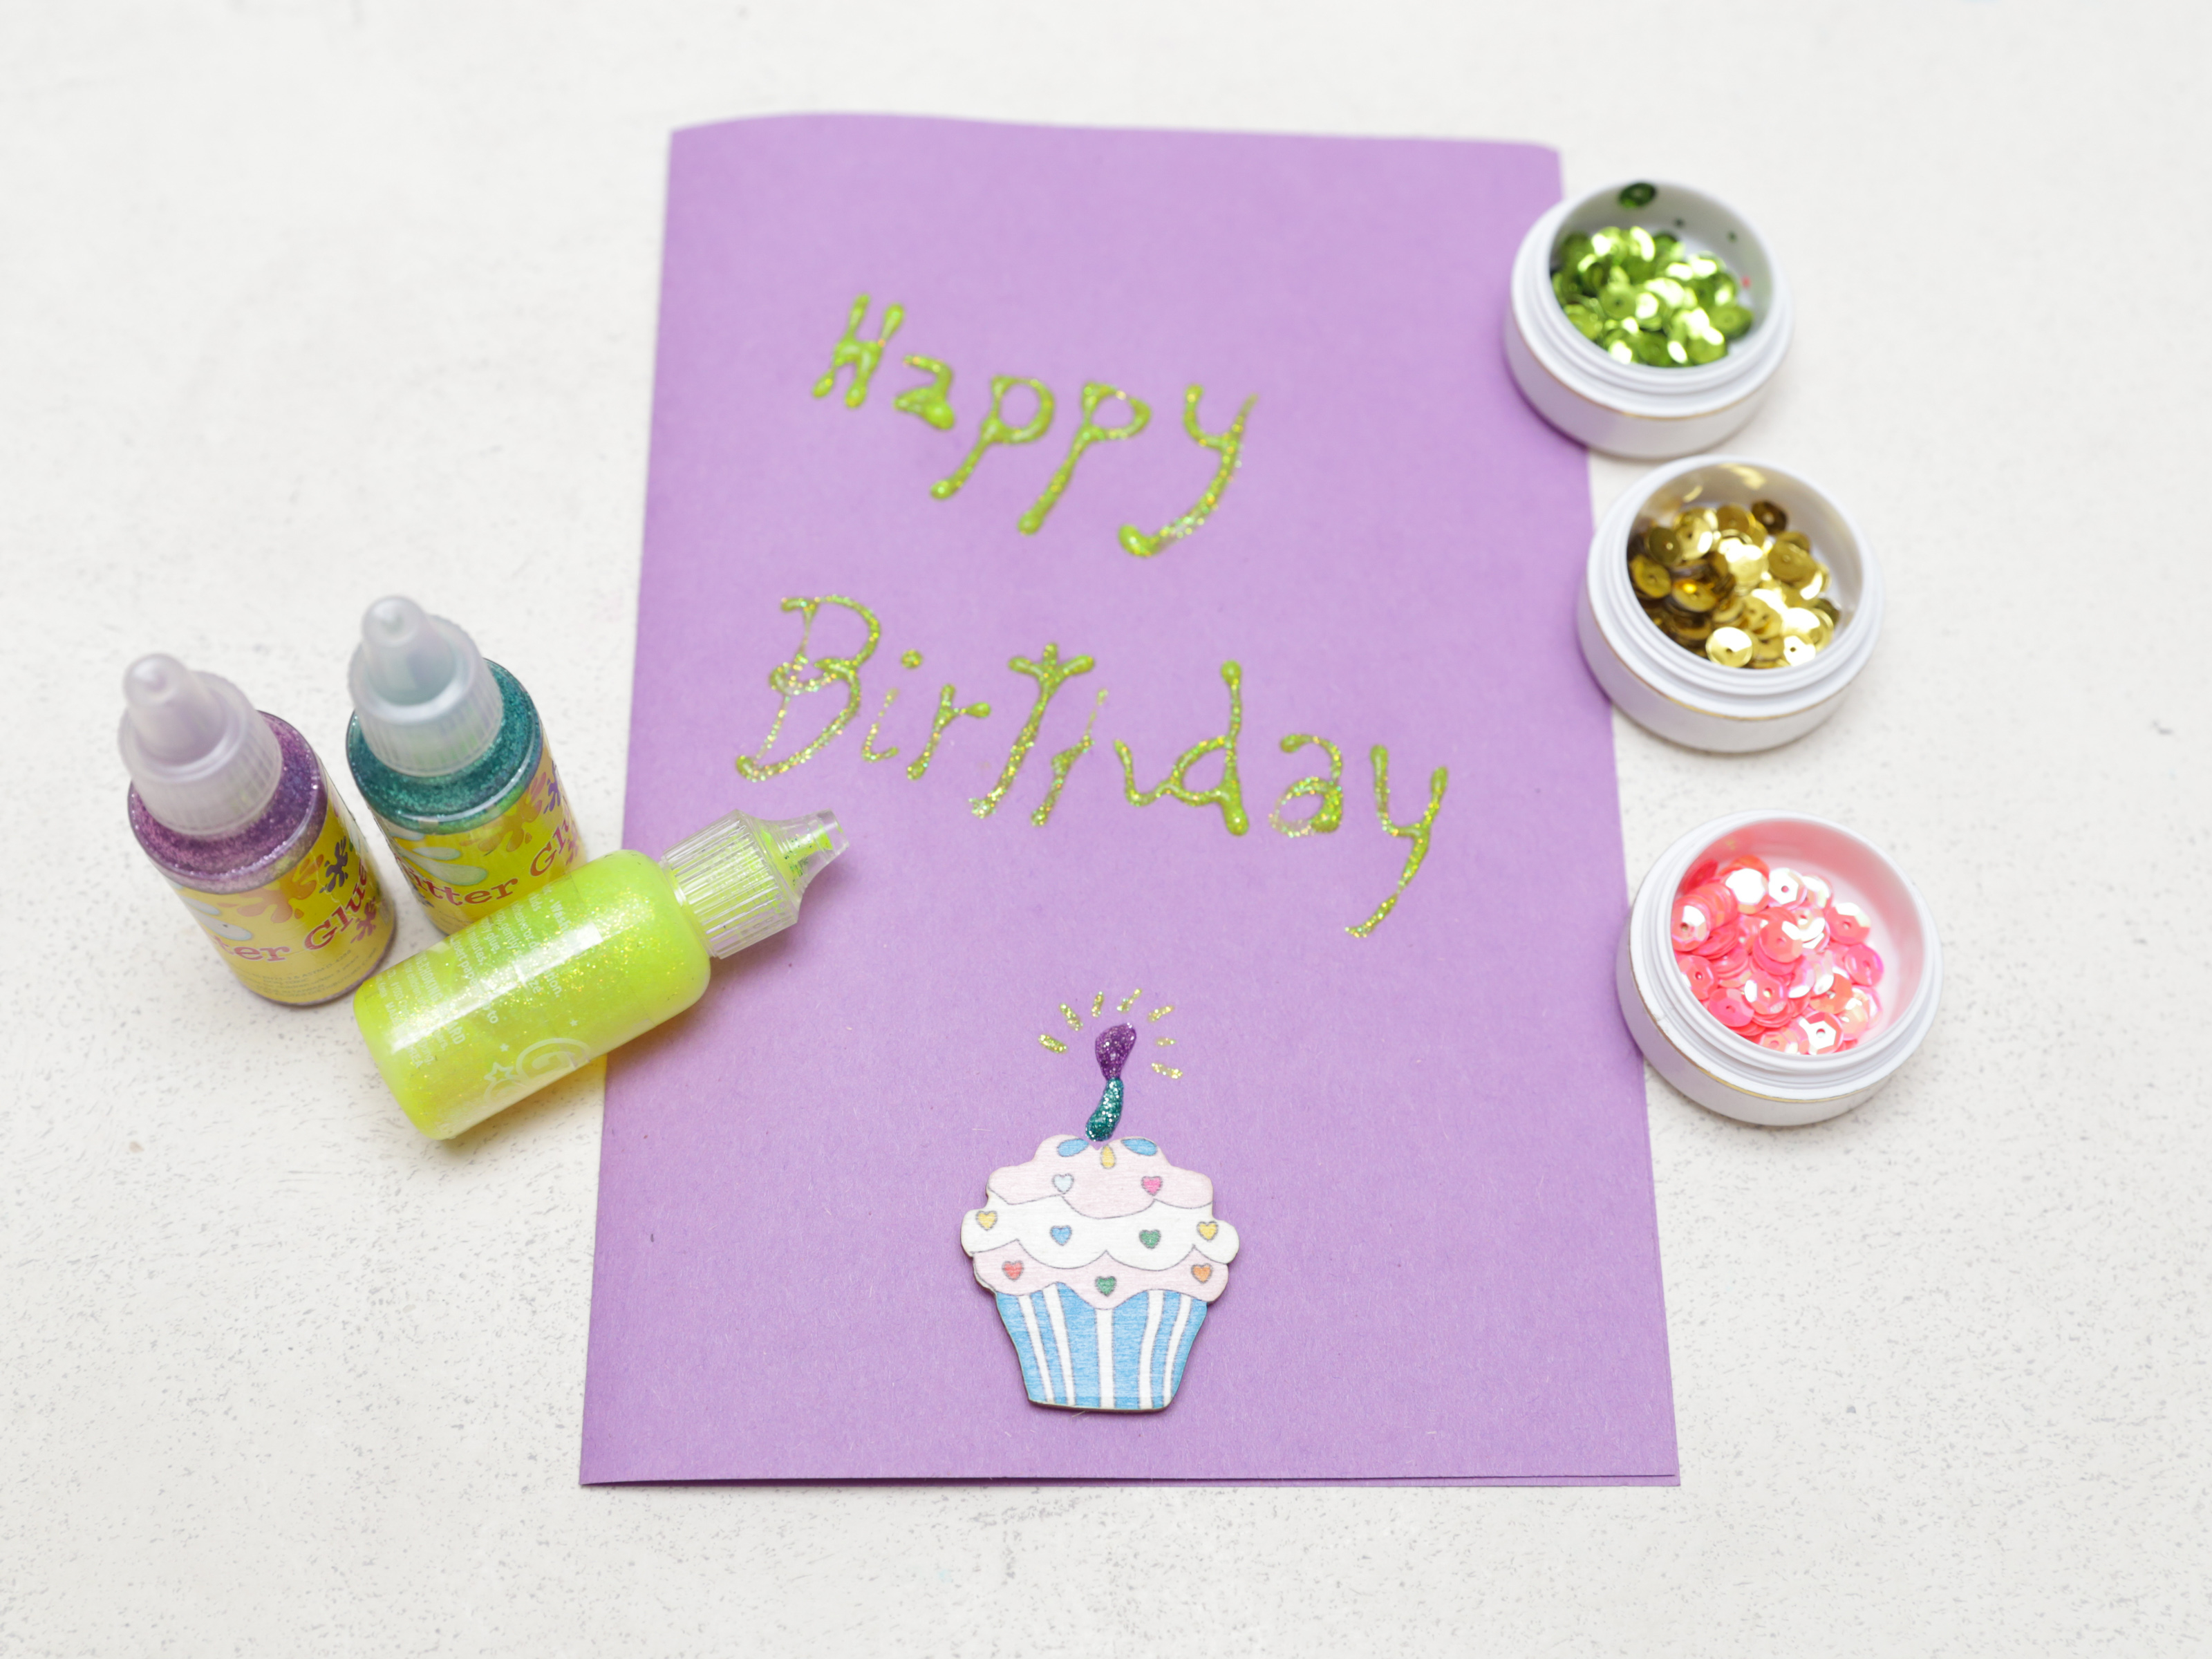 Homemade Birthday Card Ideas For Mom From Daughter How To Make A Simple Handmade Birthday Card 15 Steps